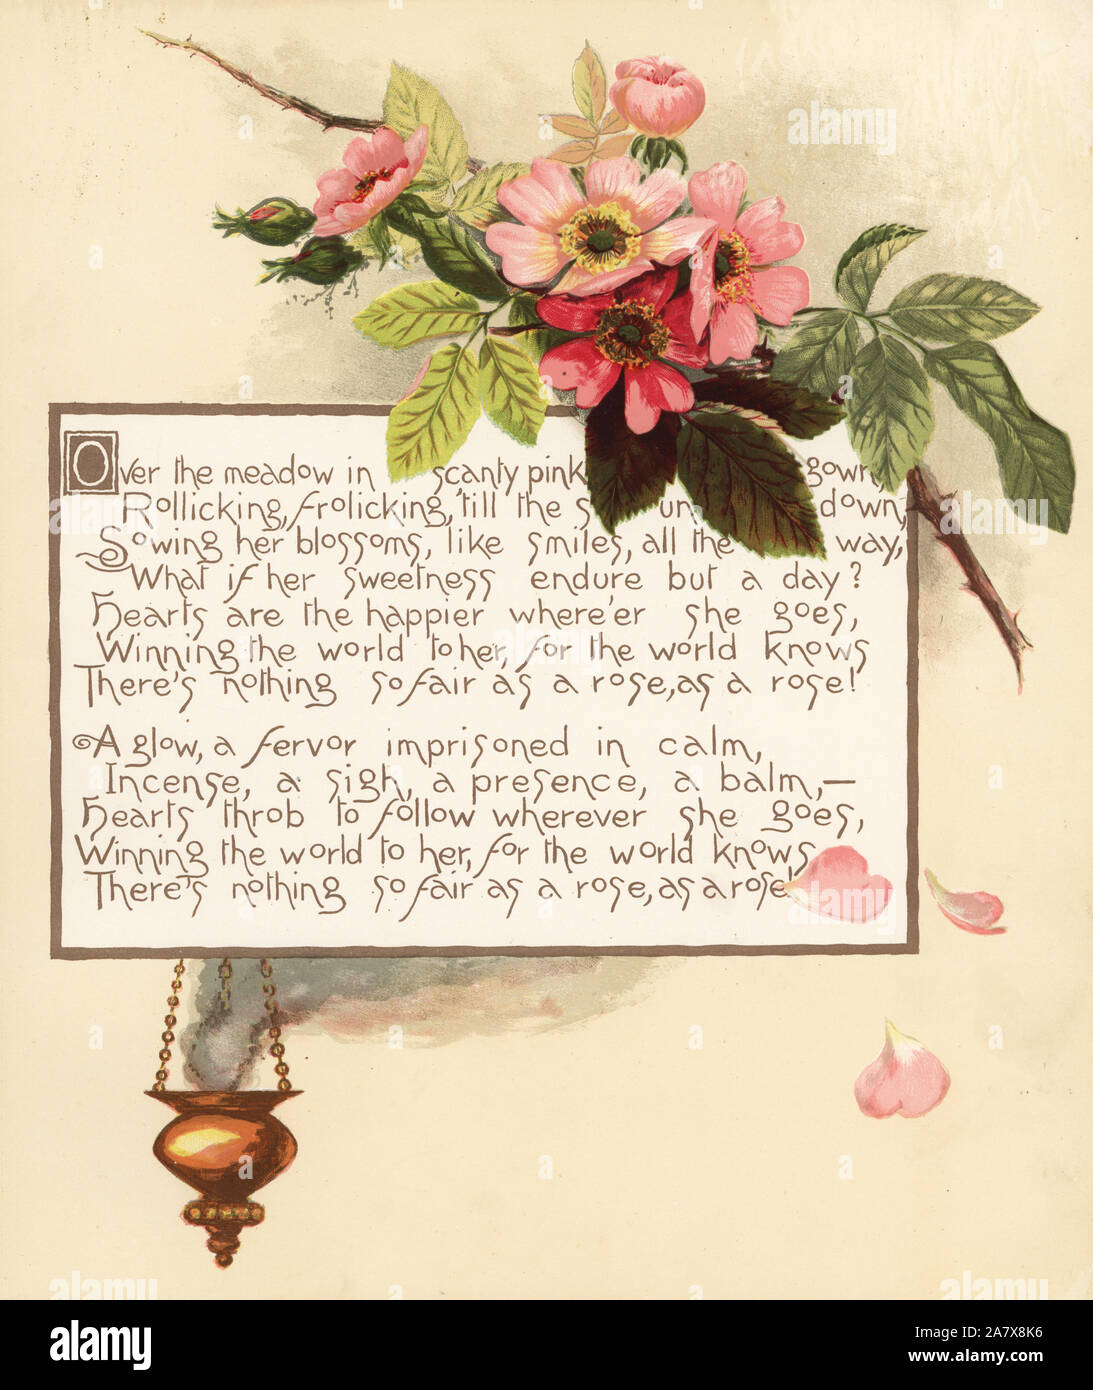 Roses, Rosa canina, with incense censer and calligraphic poem. Chromolithograph by Louis Prang from Alice Ward Bailey's Flower Fancies, Boston, 1889. Illustrated by Lucy Baily, Eleanor Ecob Morse, Olive Whitney, Ellen Fisher, Fidelia Bridges, C. Ryan and F. Schuyler Mathews. Stock Photo